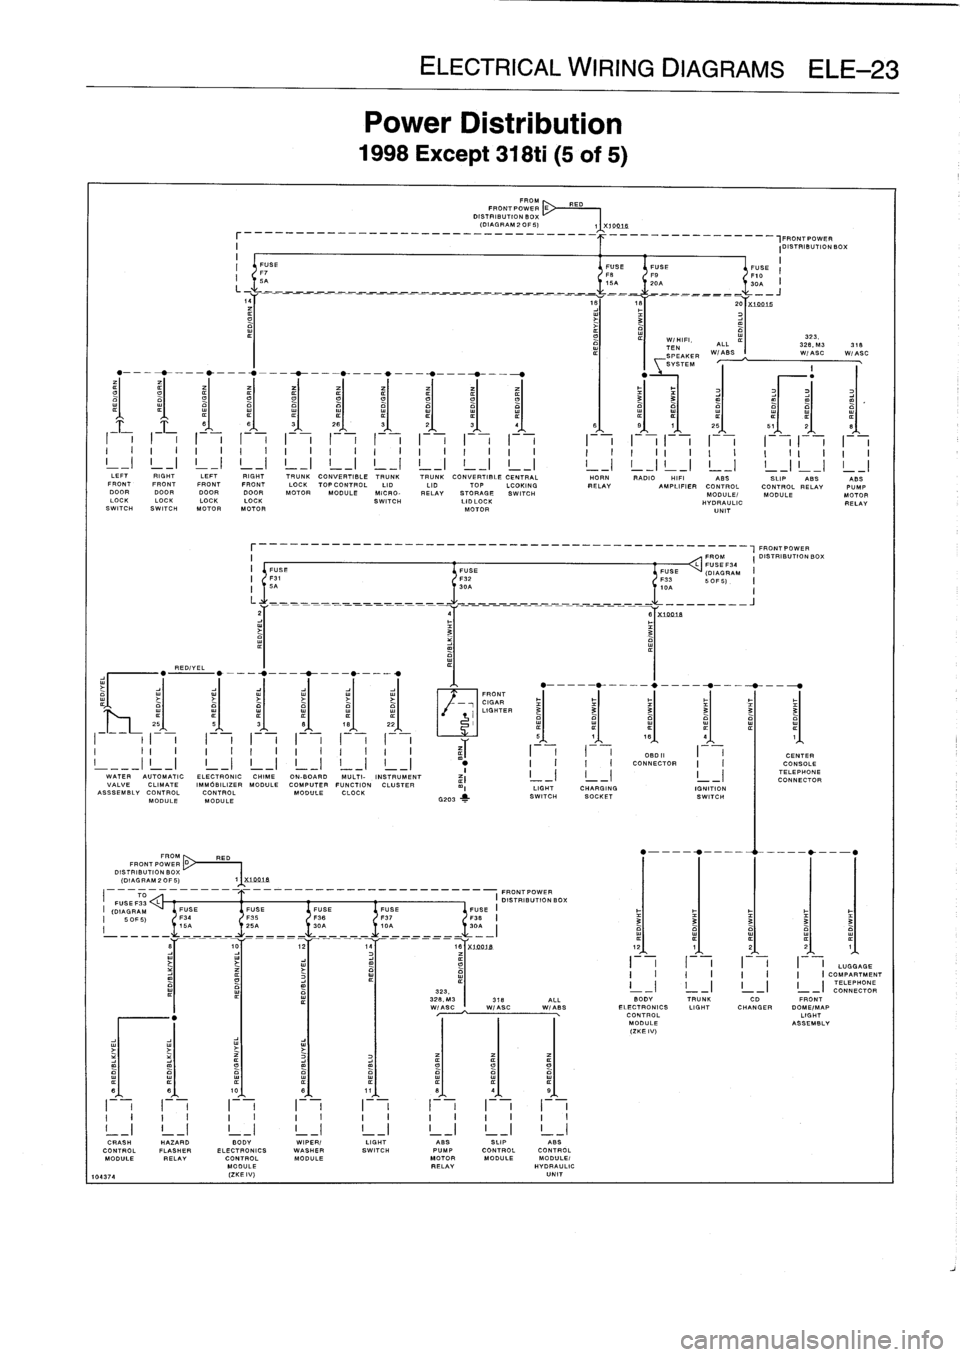 BMW 318i 1997 E36 Service Manual 
REDIYEL

FROM
RED
FRONT
PO
WE
R
D~
DISTRIBUTION
BOX
(DIAGRAM
2
OF
5)

_
_
_
_
_
_
_
_
_
_
__
,FRONTPOWER
I

	

IDISTRIBUTIONBOX
I

	

II
FUSE

	

FUSEFUSE

	

FUSE
F7

	

FS

	

FO

	

F10
I
I
5A

	
